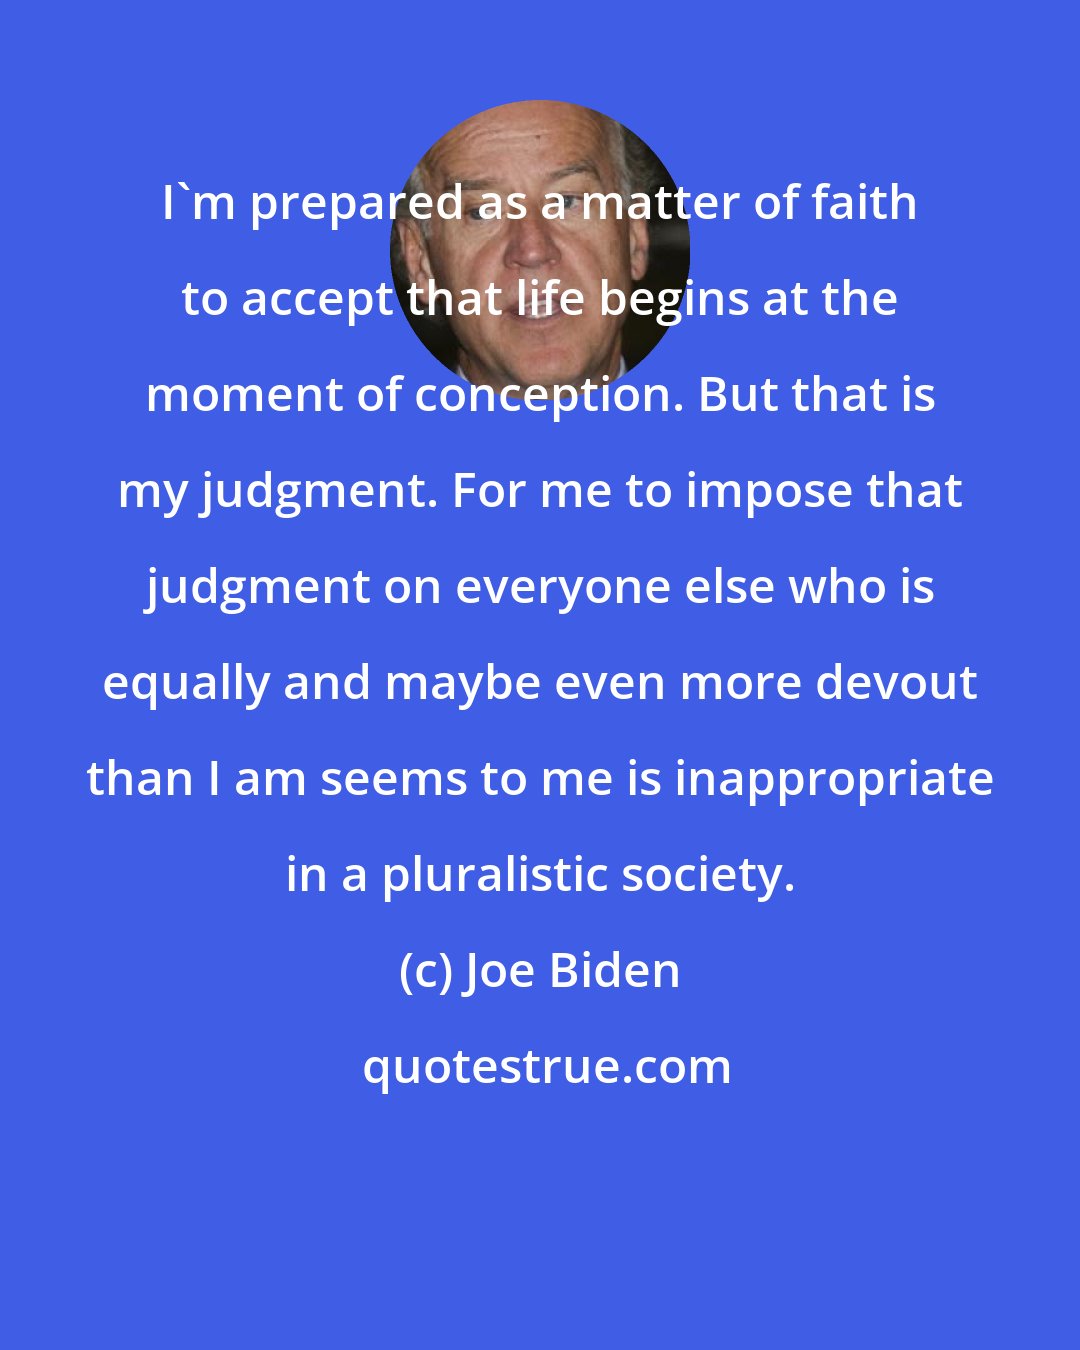 Joe Biden: I'm prepared as a matter of faith to accept that life begins at the moment of conception. But that is my judgment. For me to impose that judgment on everyone else who is equally and maybe even more devout than I am seems to me is inappropriate in a pluralistic society.